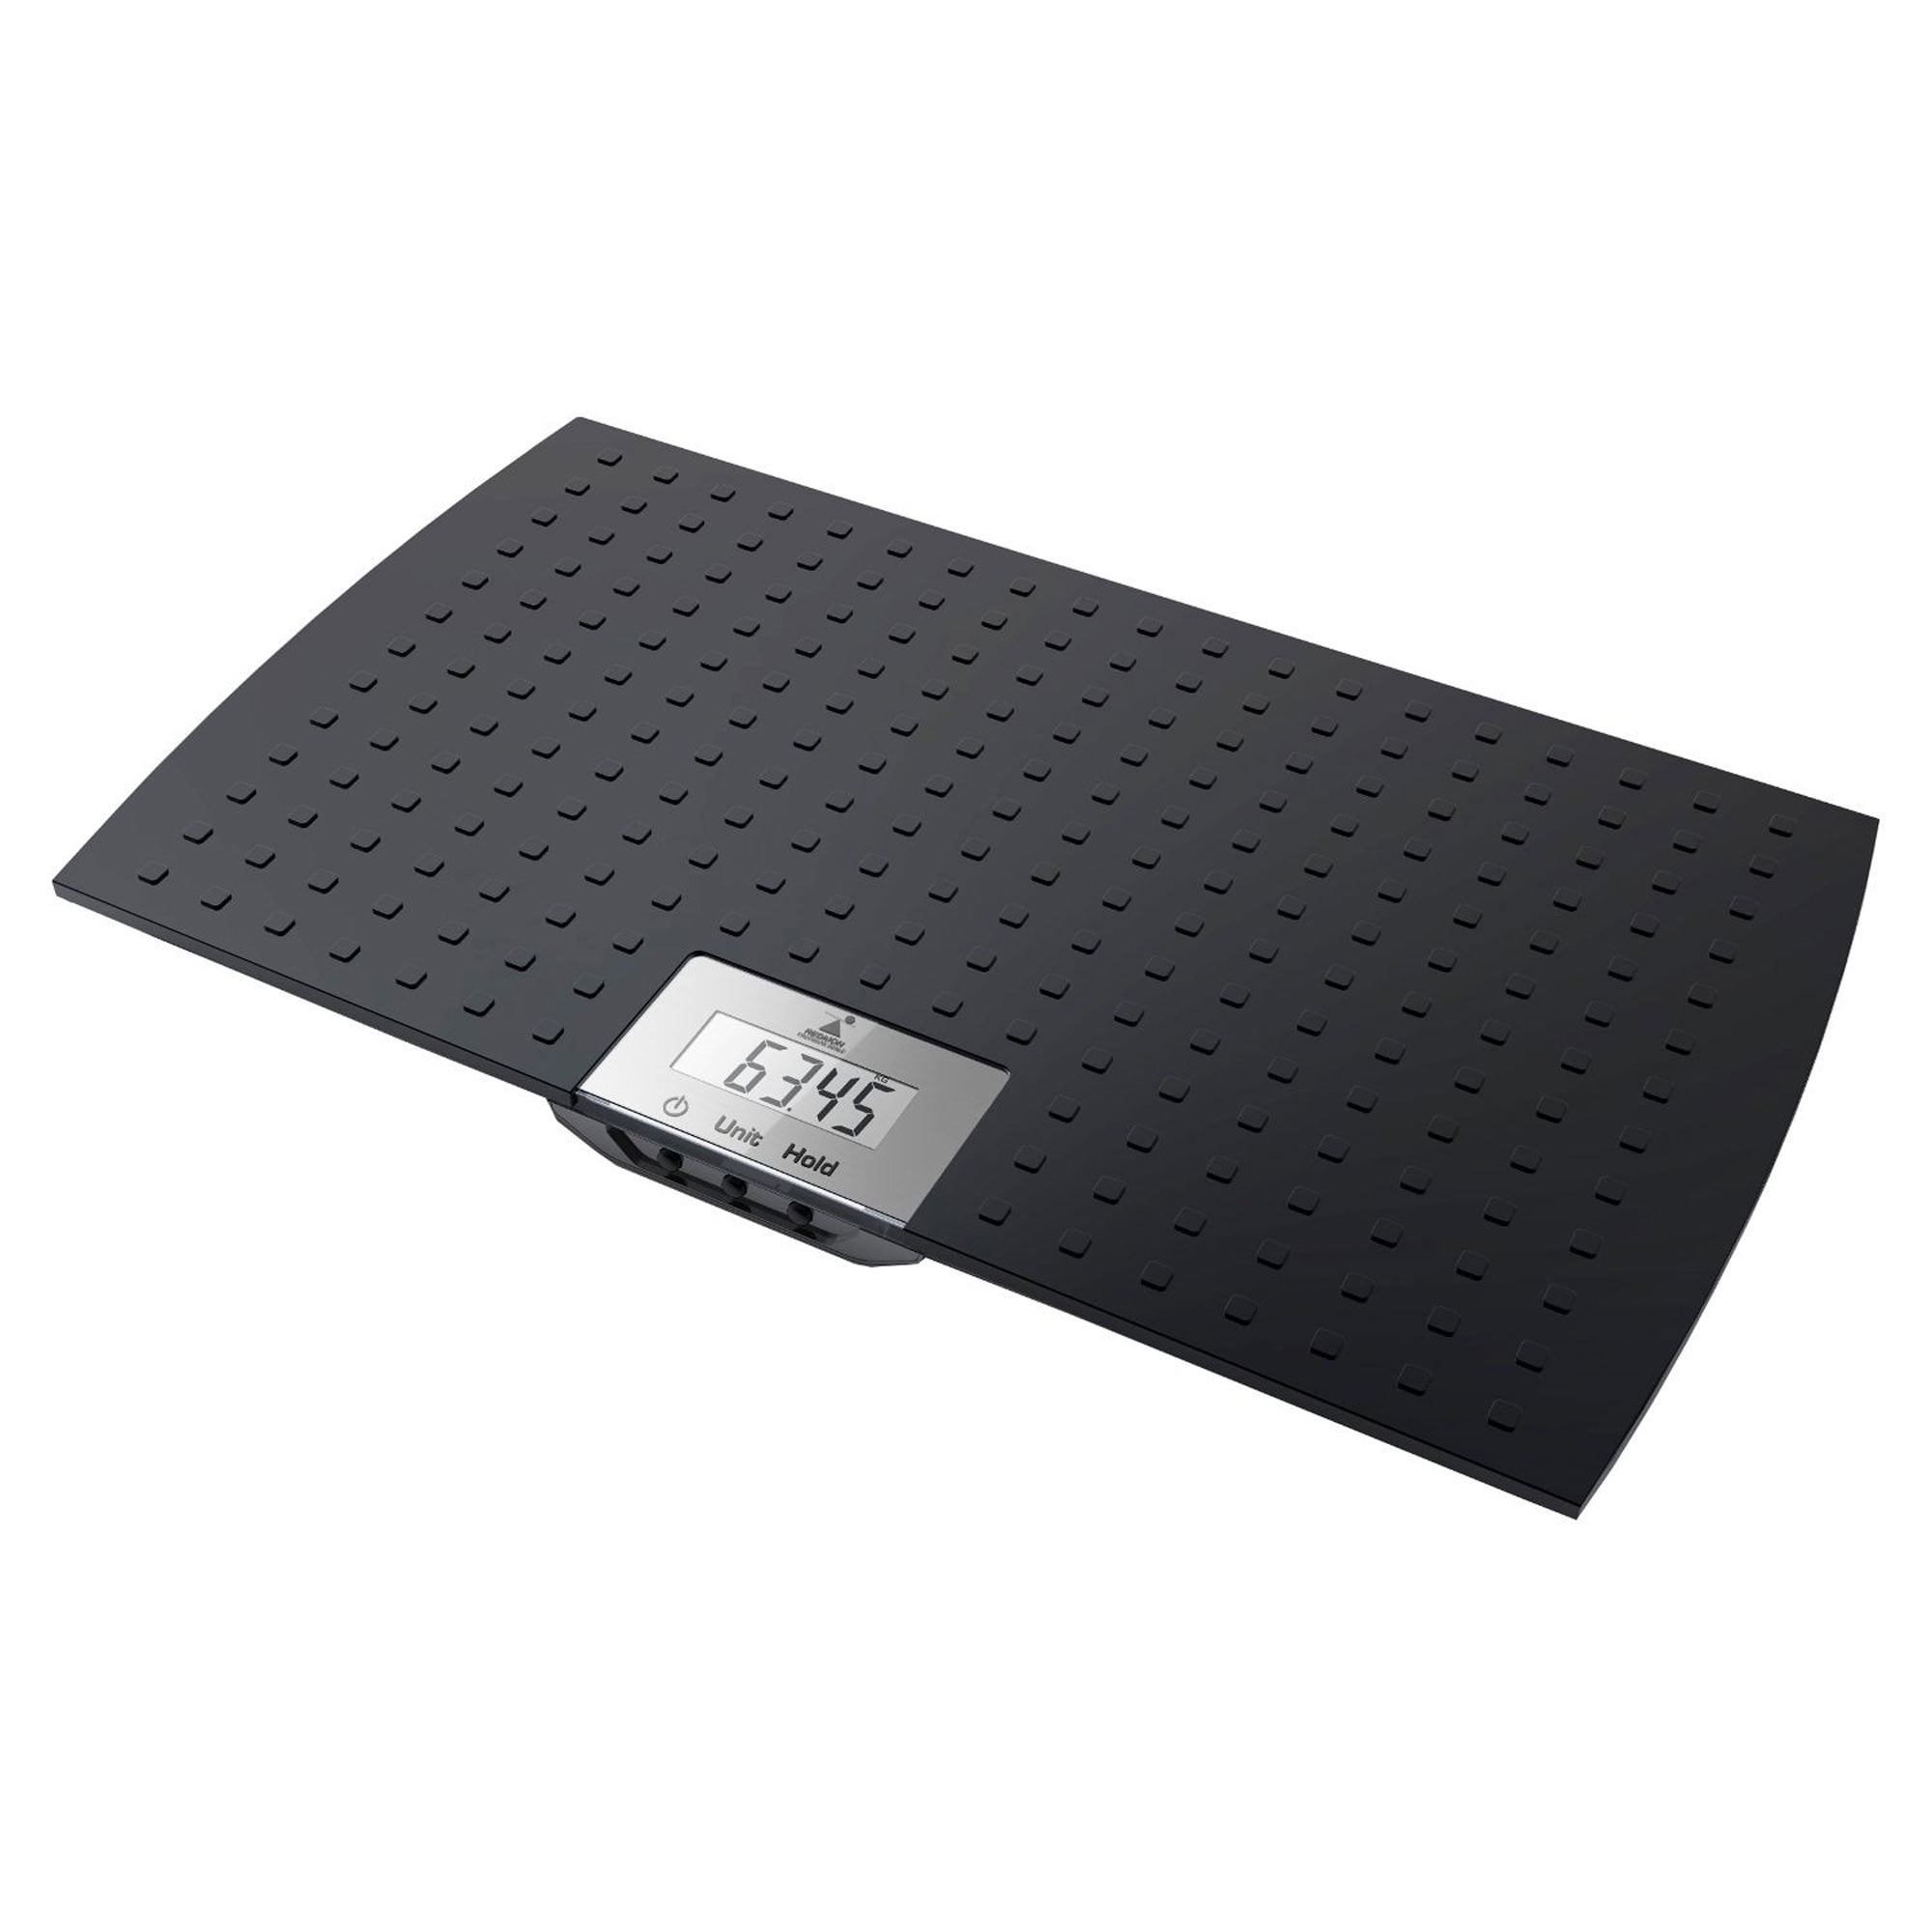 INEVIFIT Premium Bathroom Scale, Highly Accurate Digital Bathroom Body Scale,  Precisely Measures Weight up to 400 lbs - AliExpress